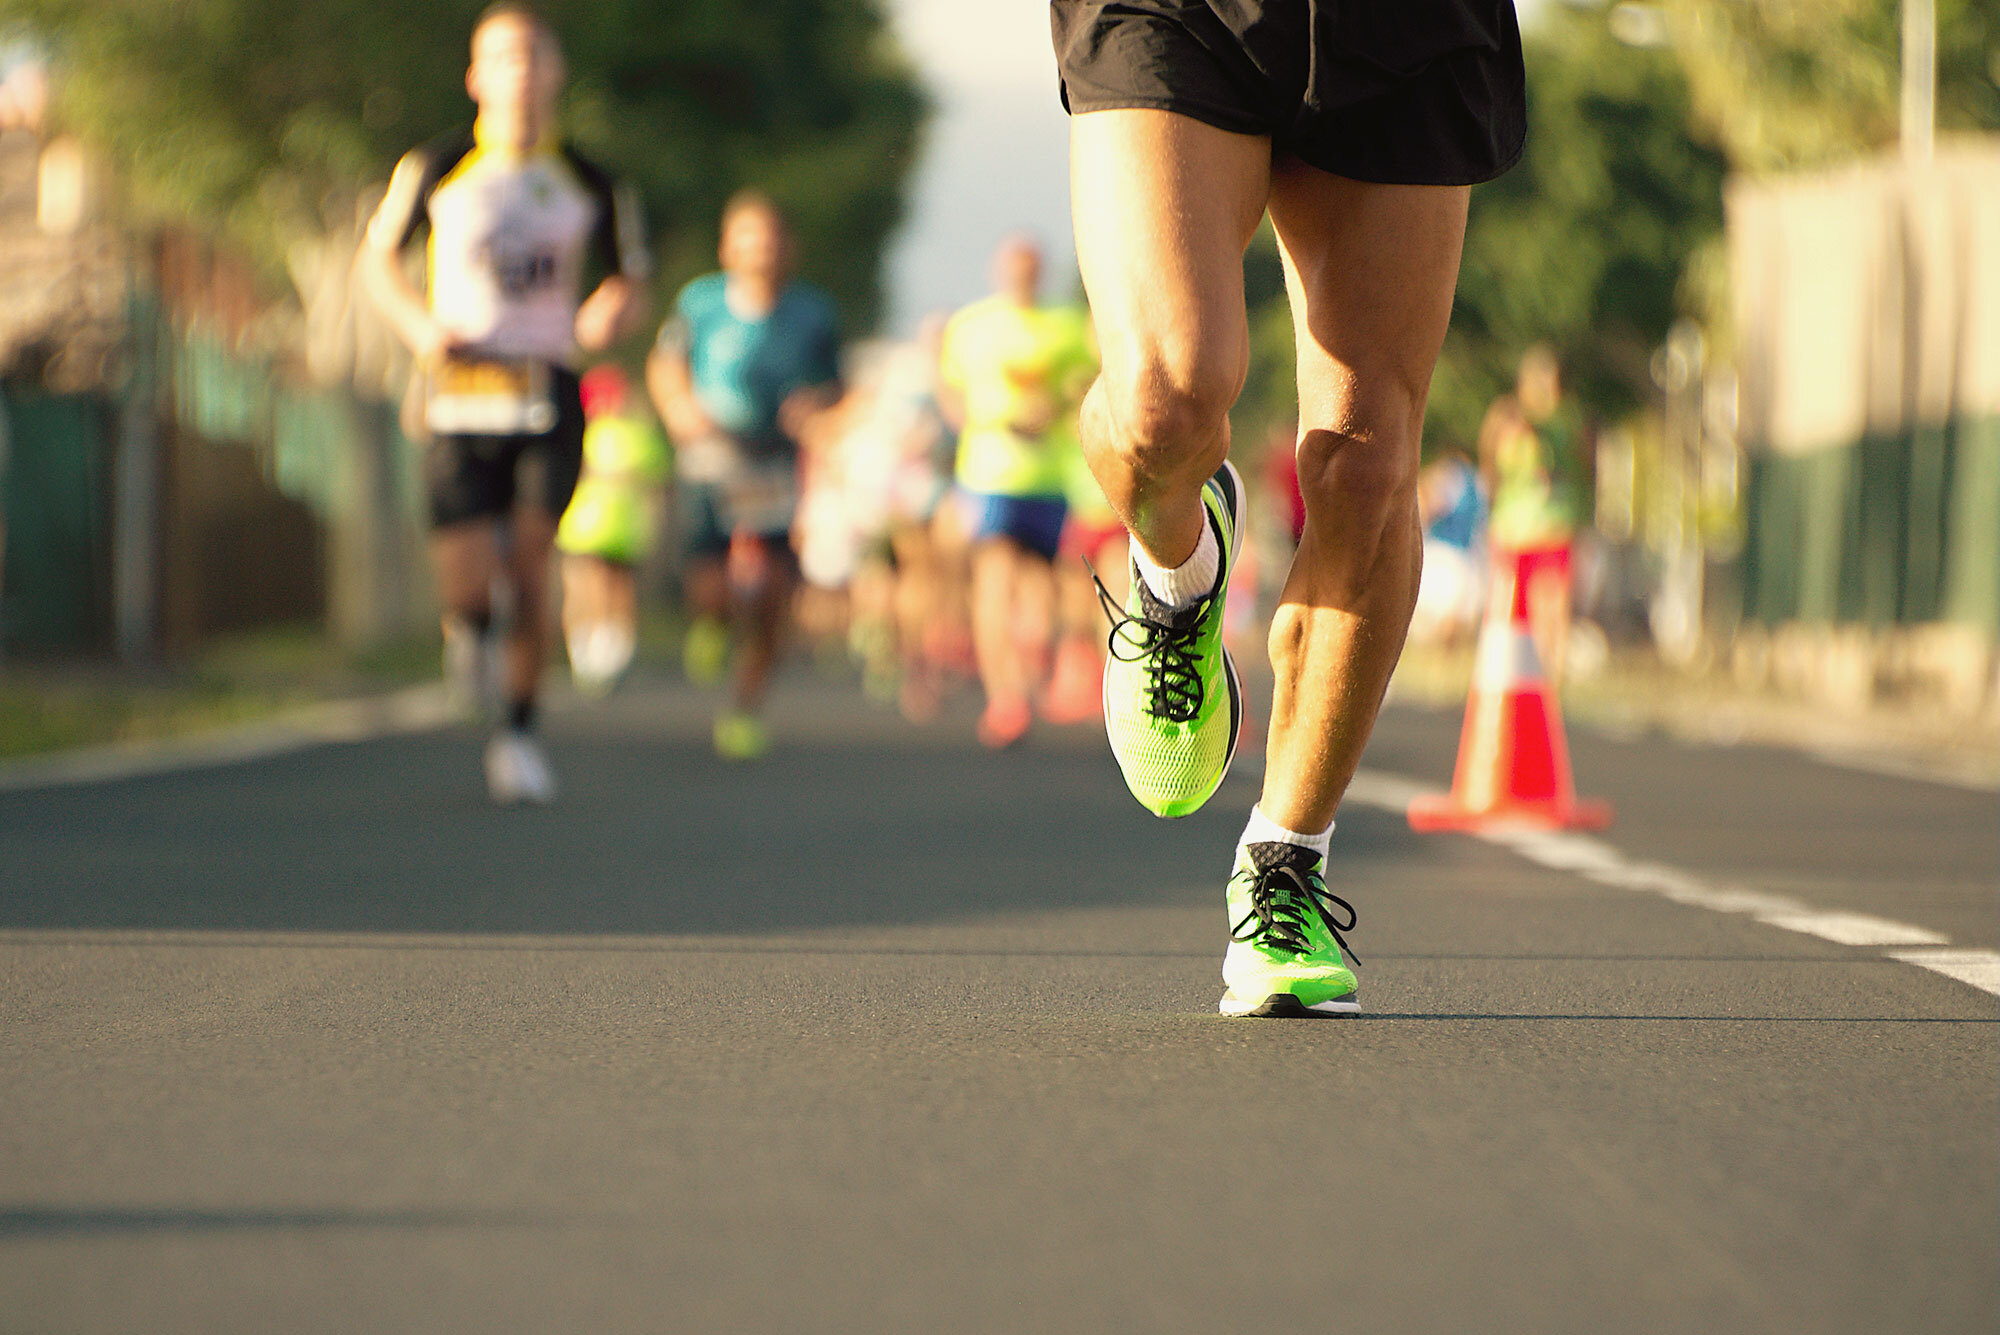 How to Stay Focused When the Finish Line Keeps Moving, finish line